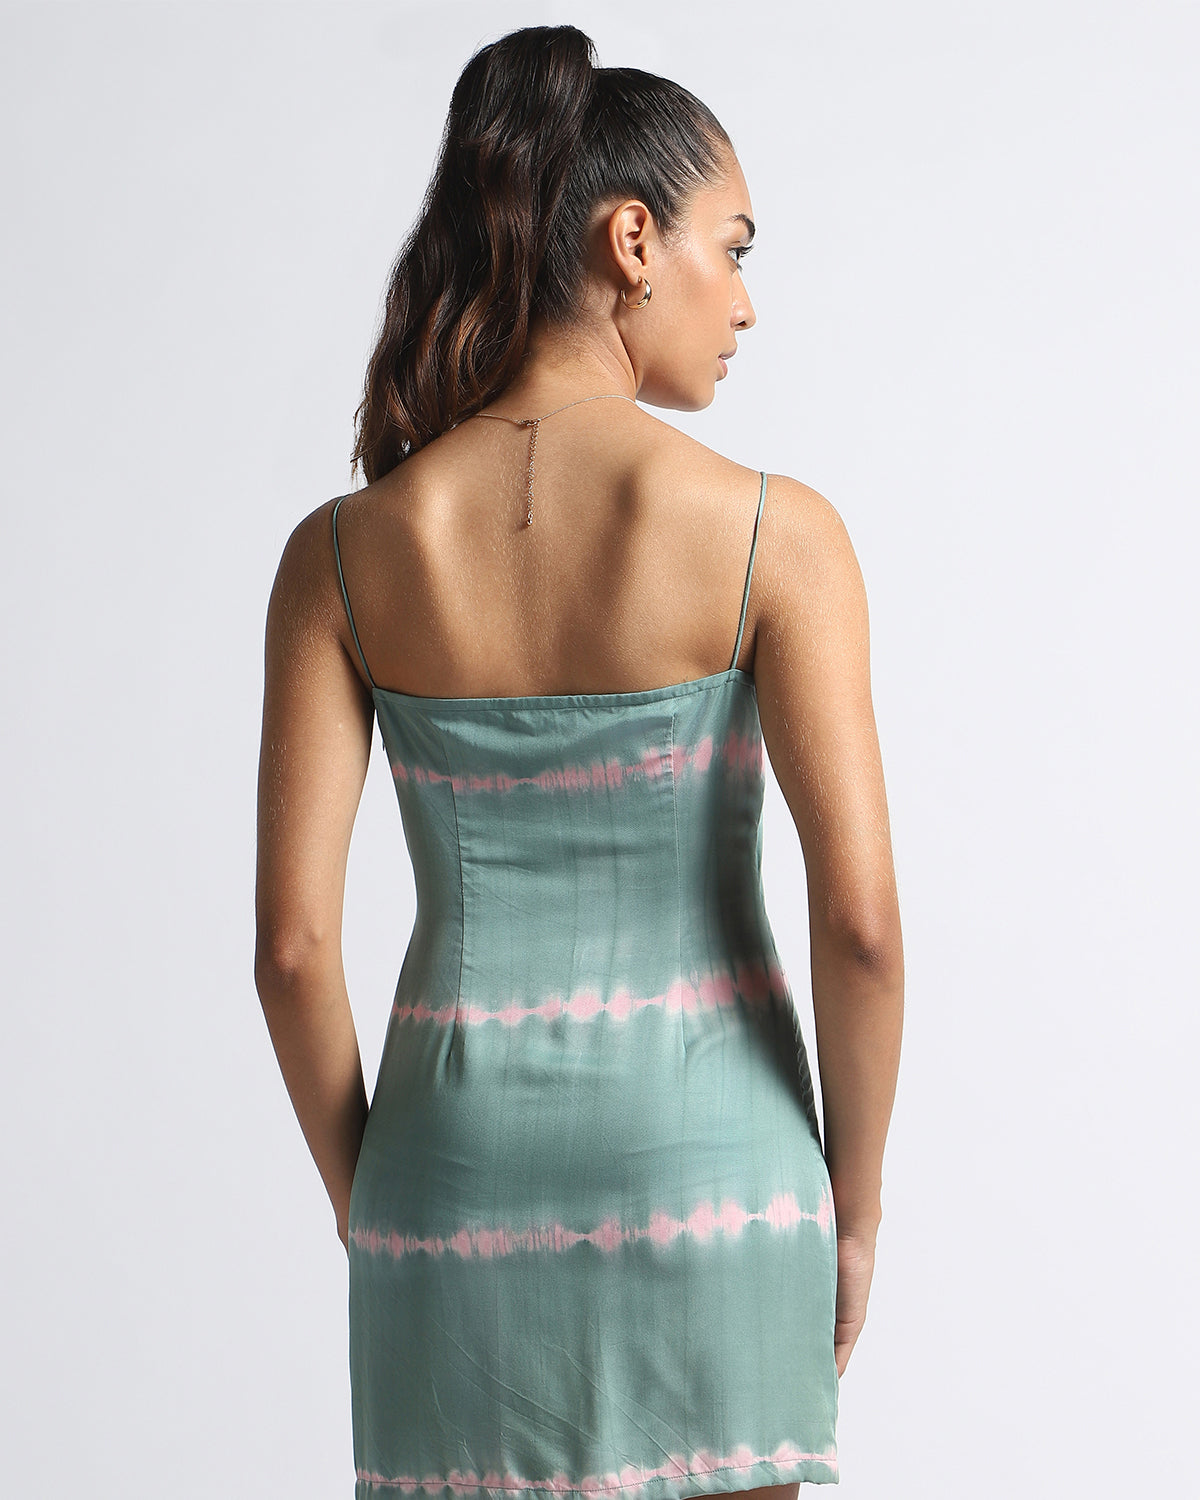 Lotus Vibration: Tie And Dye Sustainable Slip Dress In Green And Pink